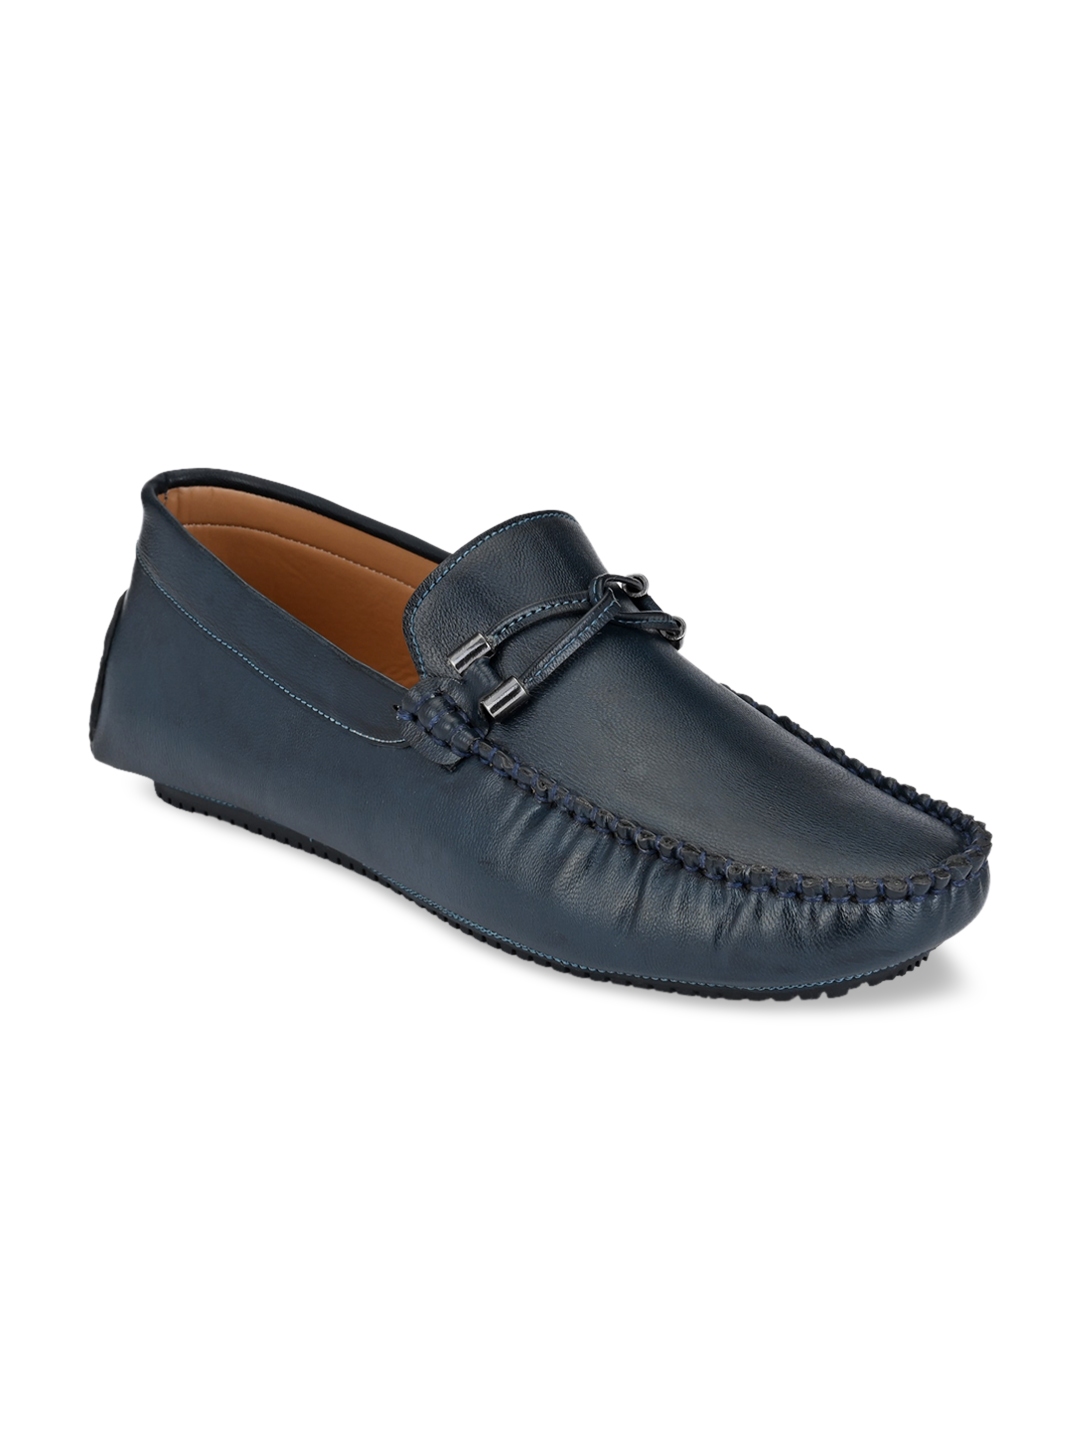 Buy Provogue Men Navy Blue Penny Loafers - Casual Shoes for Men ...